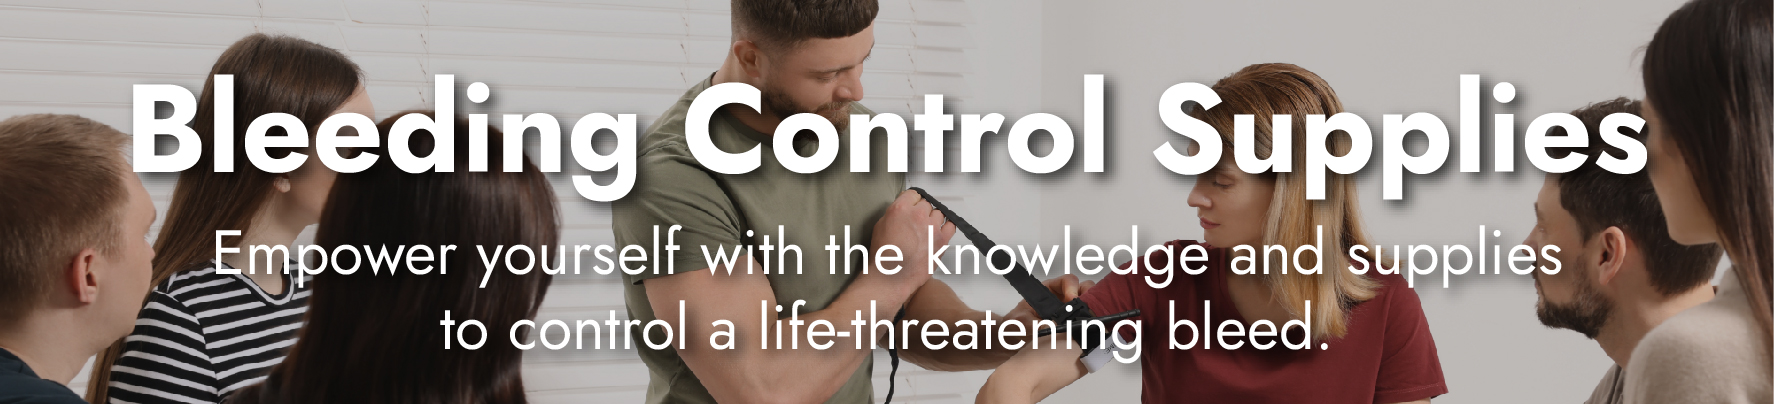 Bleeding Control Supplies Empower Yourself with the Knowledge and Supplies to Control a Life-Threatening Bleed